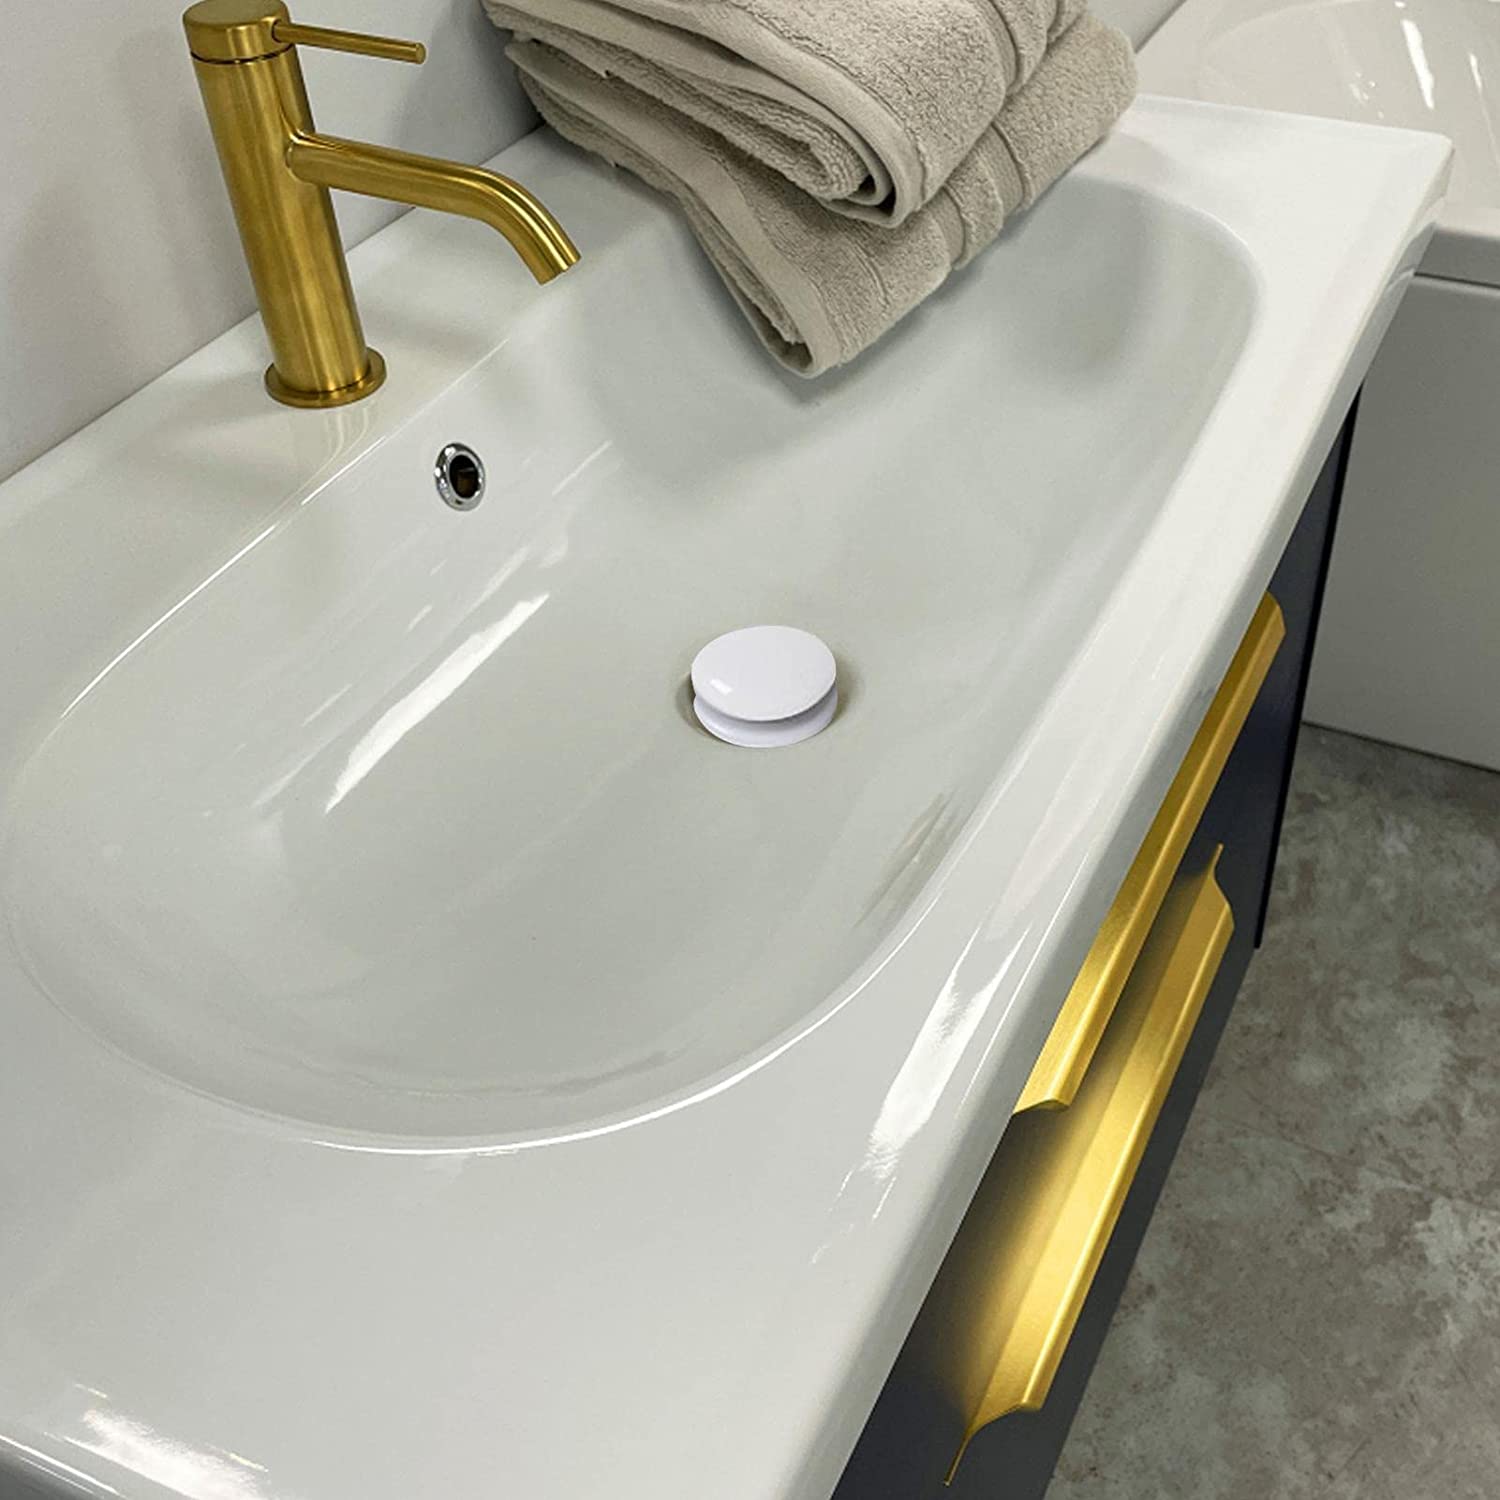 Bathroom Sink Stopper Drain Filter with Hair Catcher used in the sink